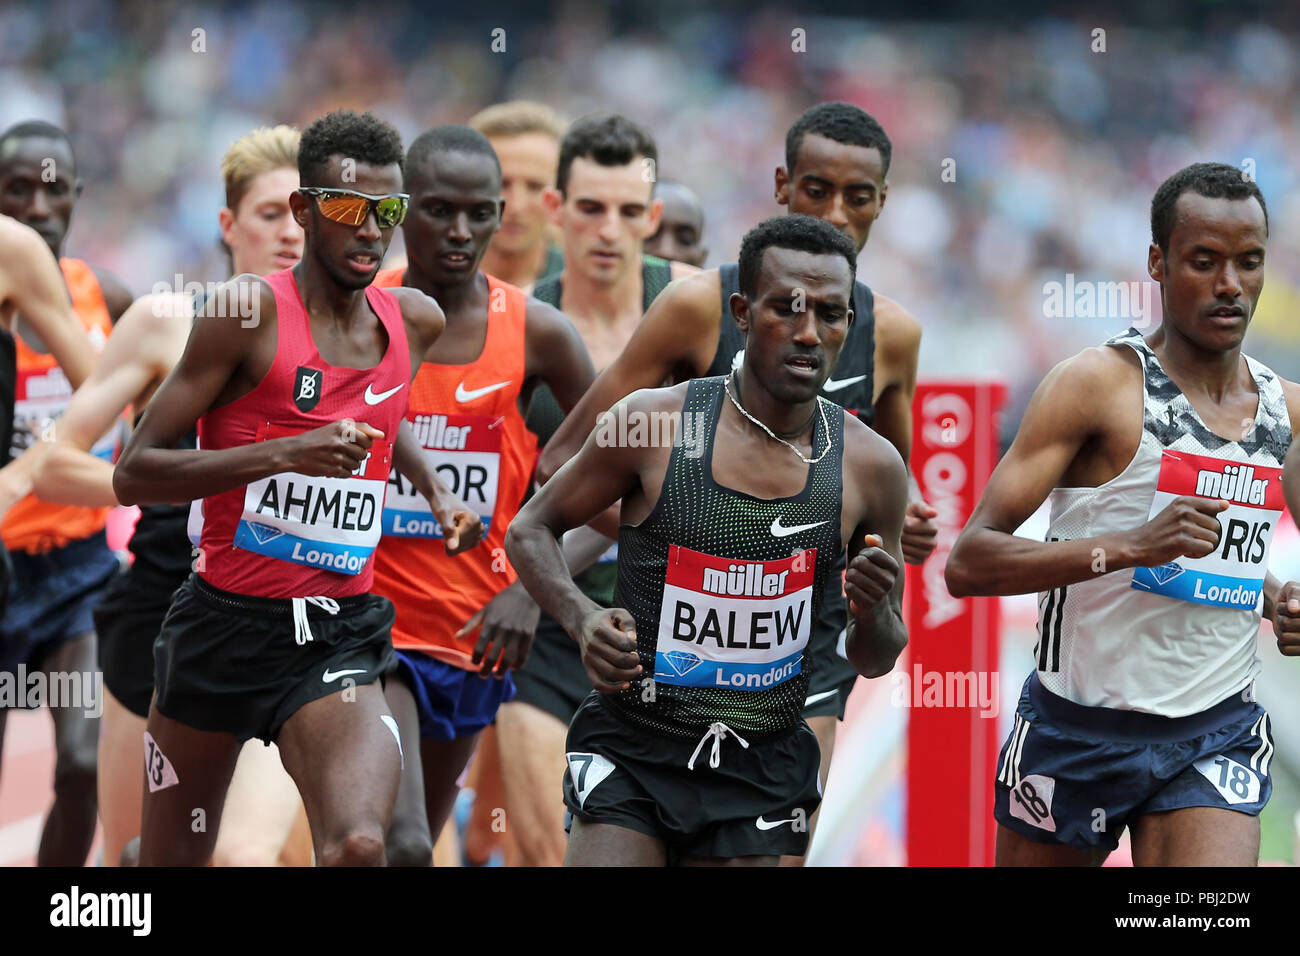 Mohammed AHMED (Canada), Birhanu BALEW (Bahrain) competing in the Men's 5000m Final at the 2018, IAAF Diamond League, Anniversary Games, Queen Elizabeth Olympic Park, Stratford, London, UK. Stock Photo